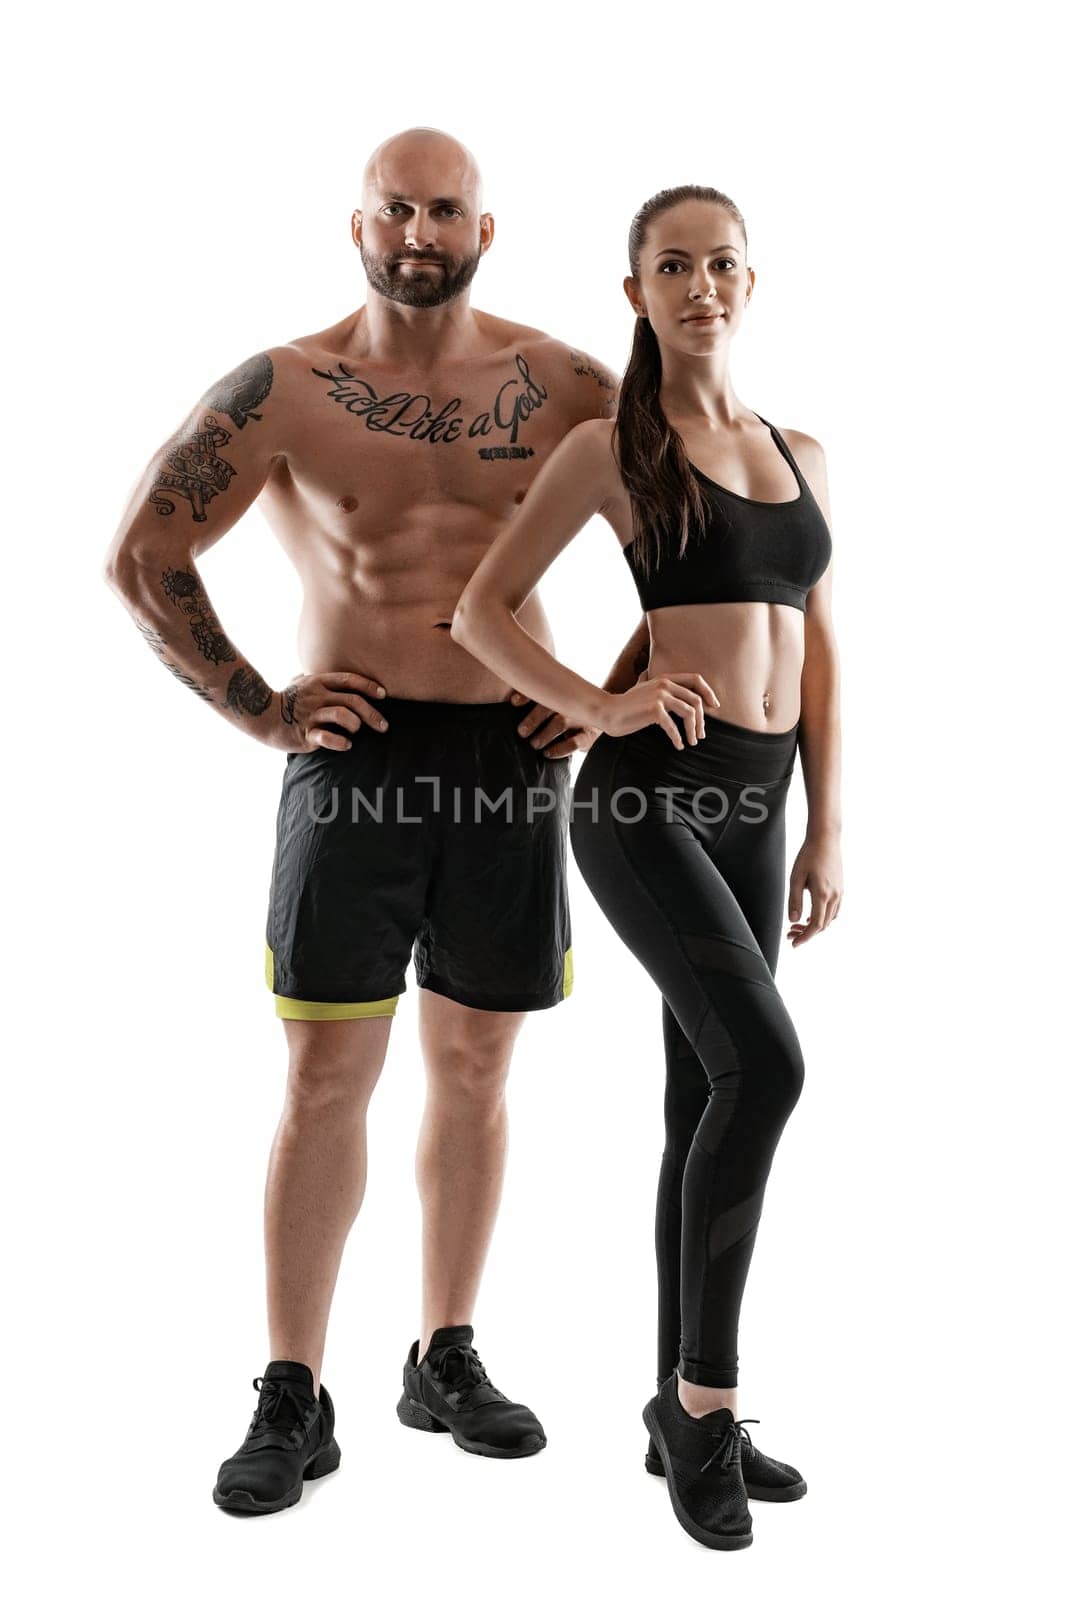 Athletic bald, tattooed man in black shorts and sneakers with cute brunette woman in leggings and top are posing isolated on white background and looking at the camera. Fitness couple, chic muscular bodies, gym concept. The love story.